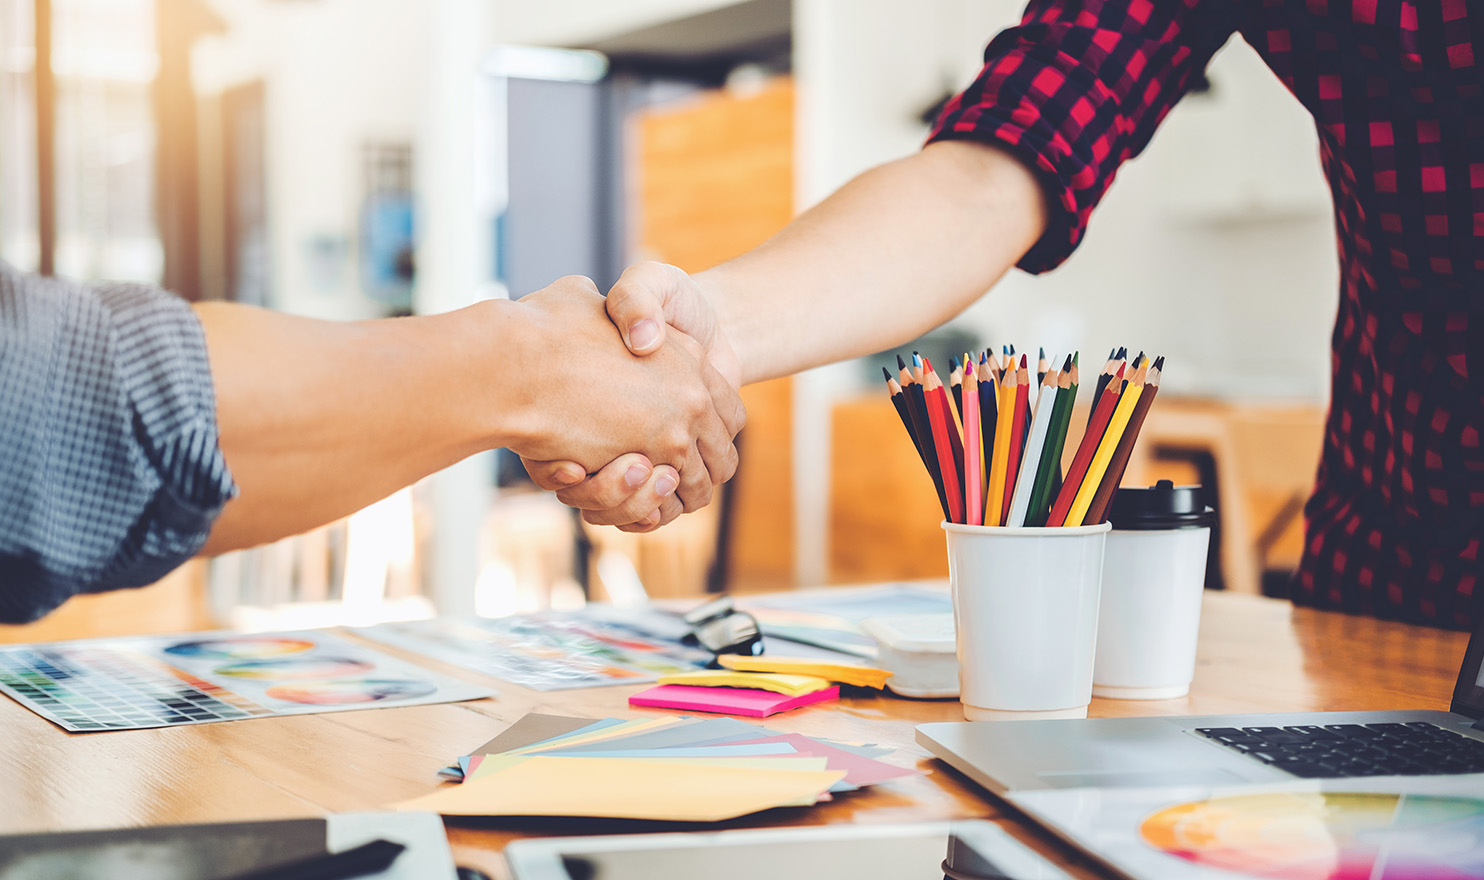 A business owner and a customer shake hands over a desk with art supplies.